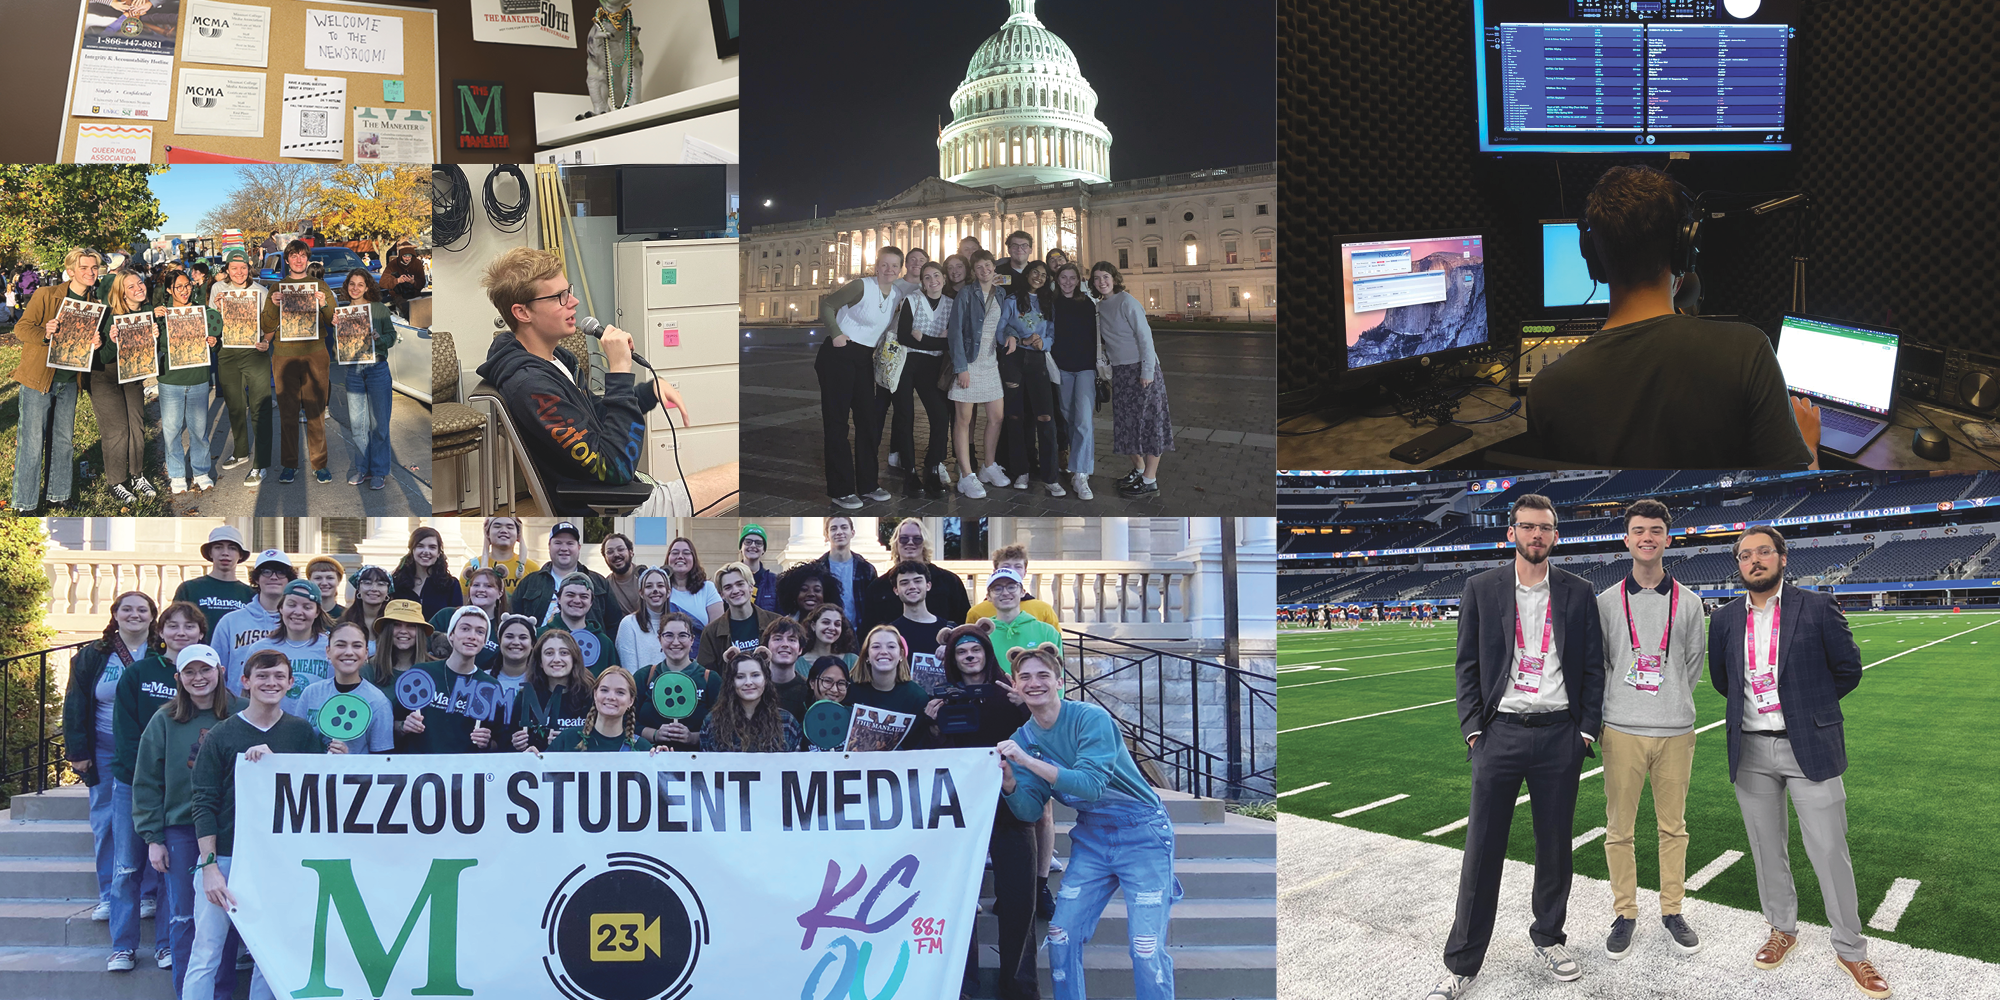 Collage of photos of Mizzou Student Media staffers with newspapers, at the United States Capitol, in front of a studio monitor, holding a microphone, on the field at a football stadium, and a group photo holding a sign that says 'Mizzou Student Media'